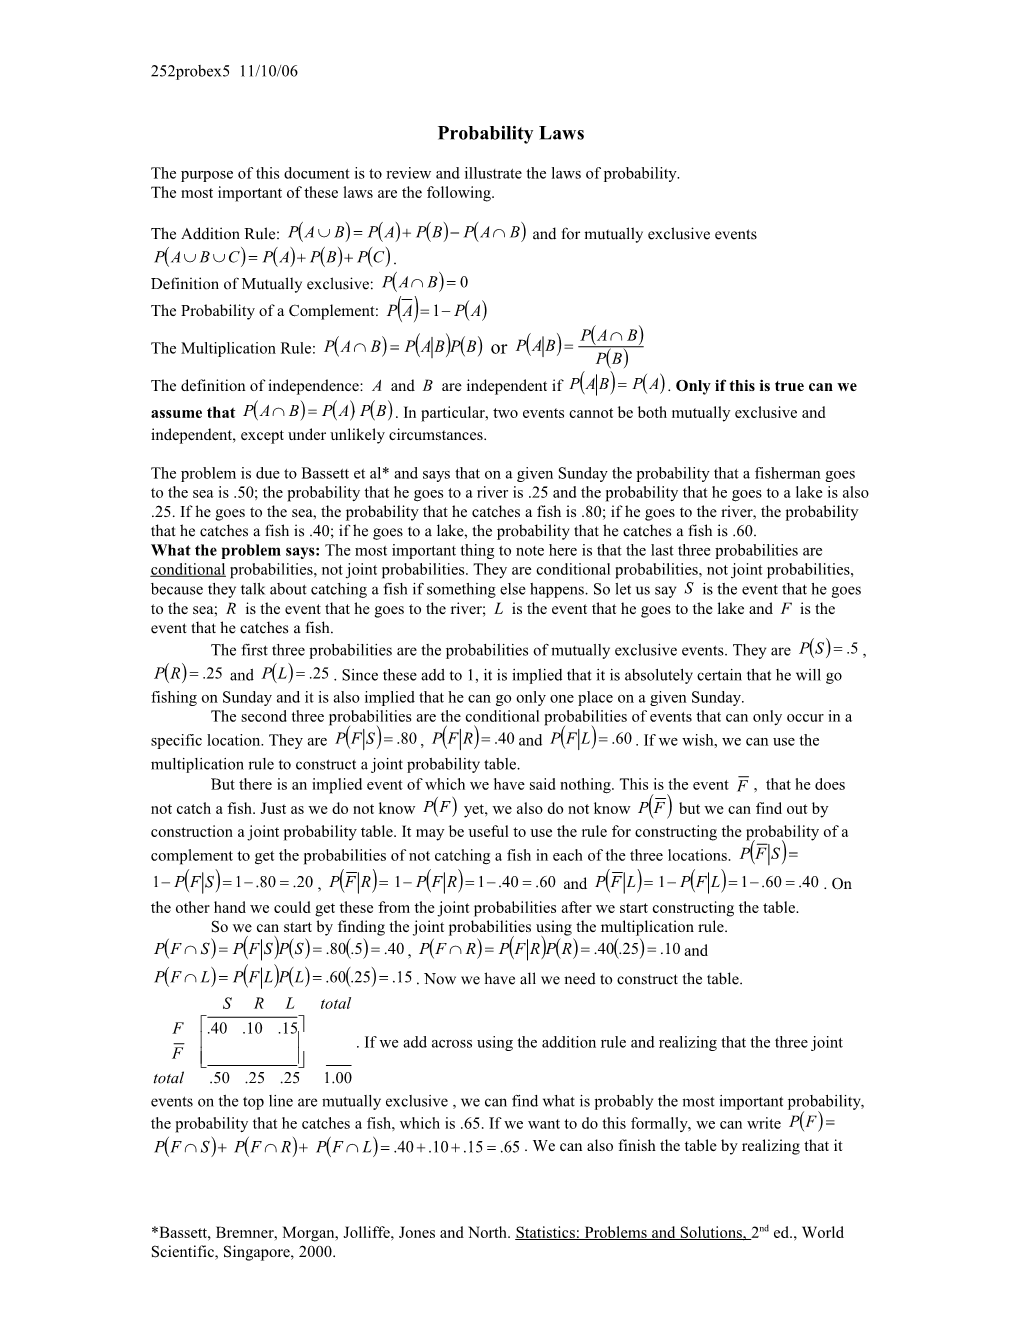 The Purpose of This Document Is to Review and Illustrate the Laws of Probability